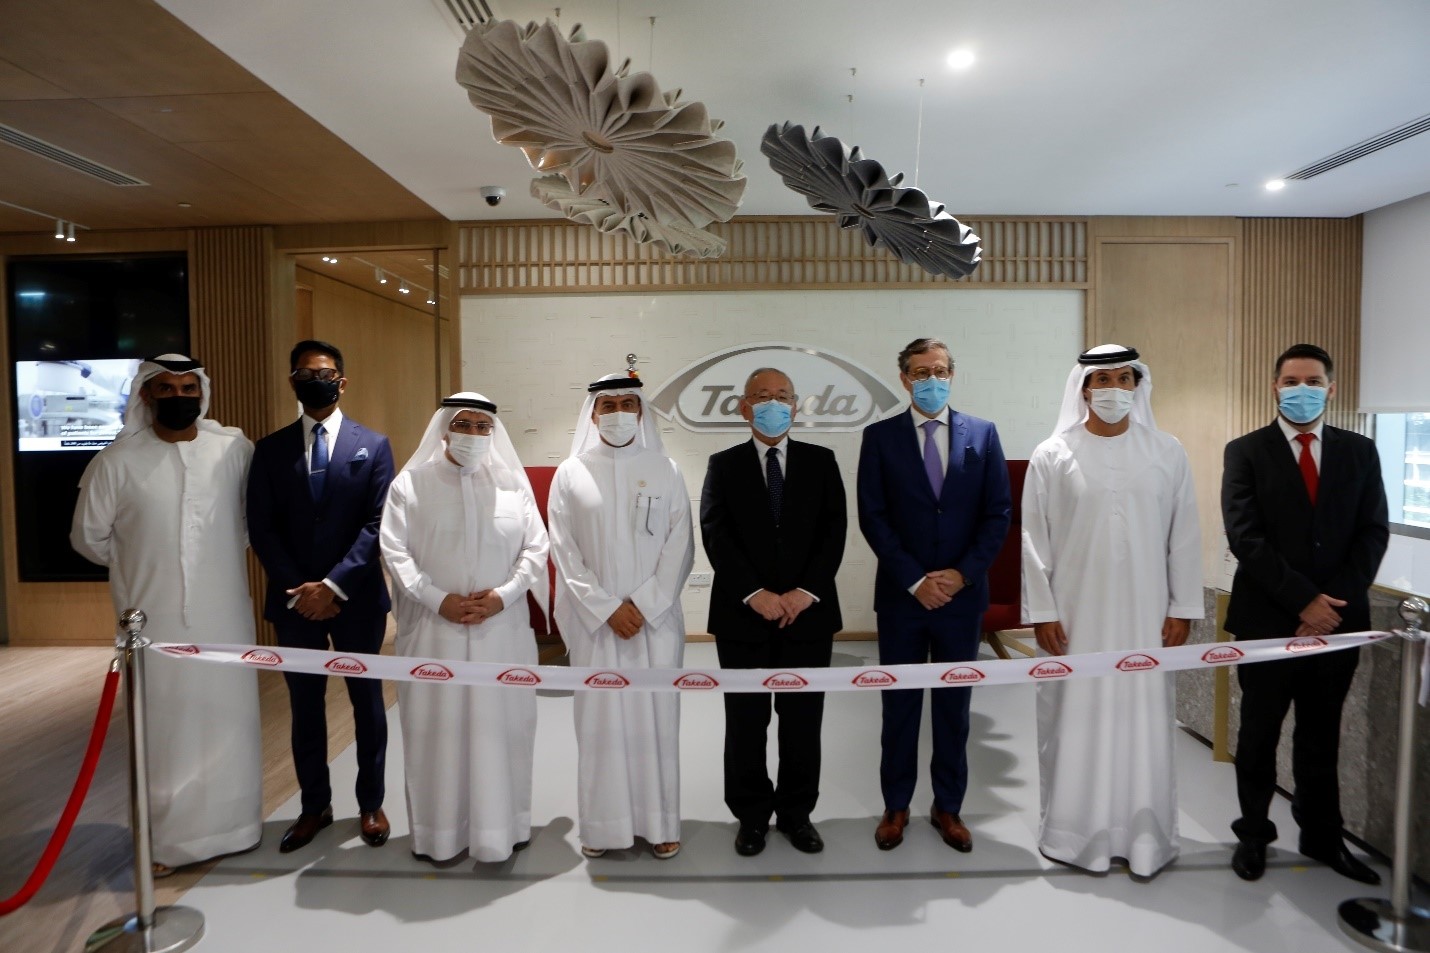 (Pictured from left to right) Dr. Marwan Abdulaziz Janahi, Chairman of the Board, UAE Rare Disease Society; Dr. Mahender Nayak, Senior Vice President & Area Head, ICMEA, Takeda; Dr. Ali Al Sayed, Director, Pharmaceutical Services Department; H.E. Dr. Amin Al Amiri, Assistant Undersecretary for Health Regulations Sector at the Ministry of Health and Prevention; H.E. Akihiko Nakajima, Japanese Ambassador to the U.A.E.; Ricardo Marek, President, Growth & Emerging Markets, Takeda; H.E. Helal Al Marri, Director General of Dubai's Department of Economy and Tourism; Rodrigo Rodriguez, General Manager, Middle East Cluster, Takeda